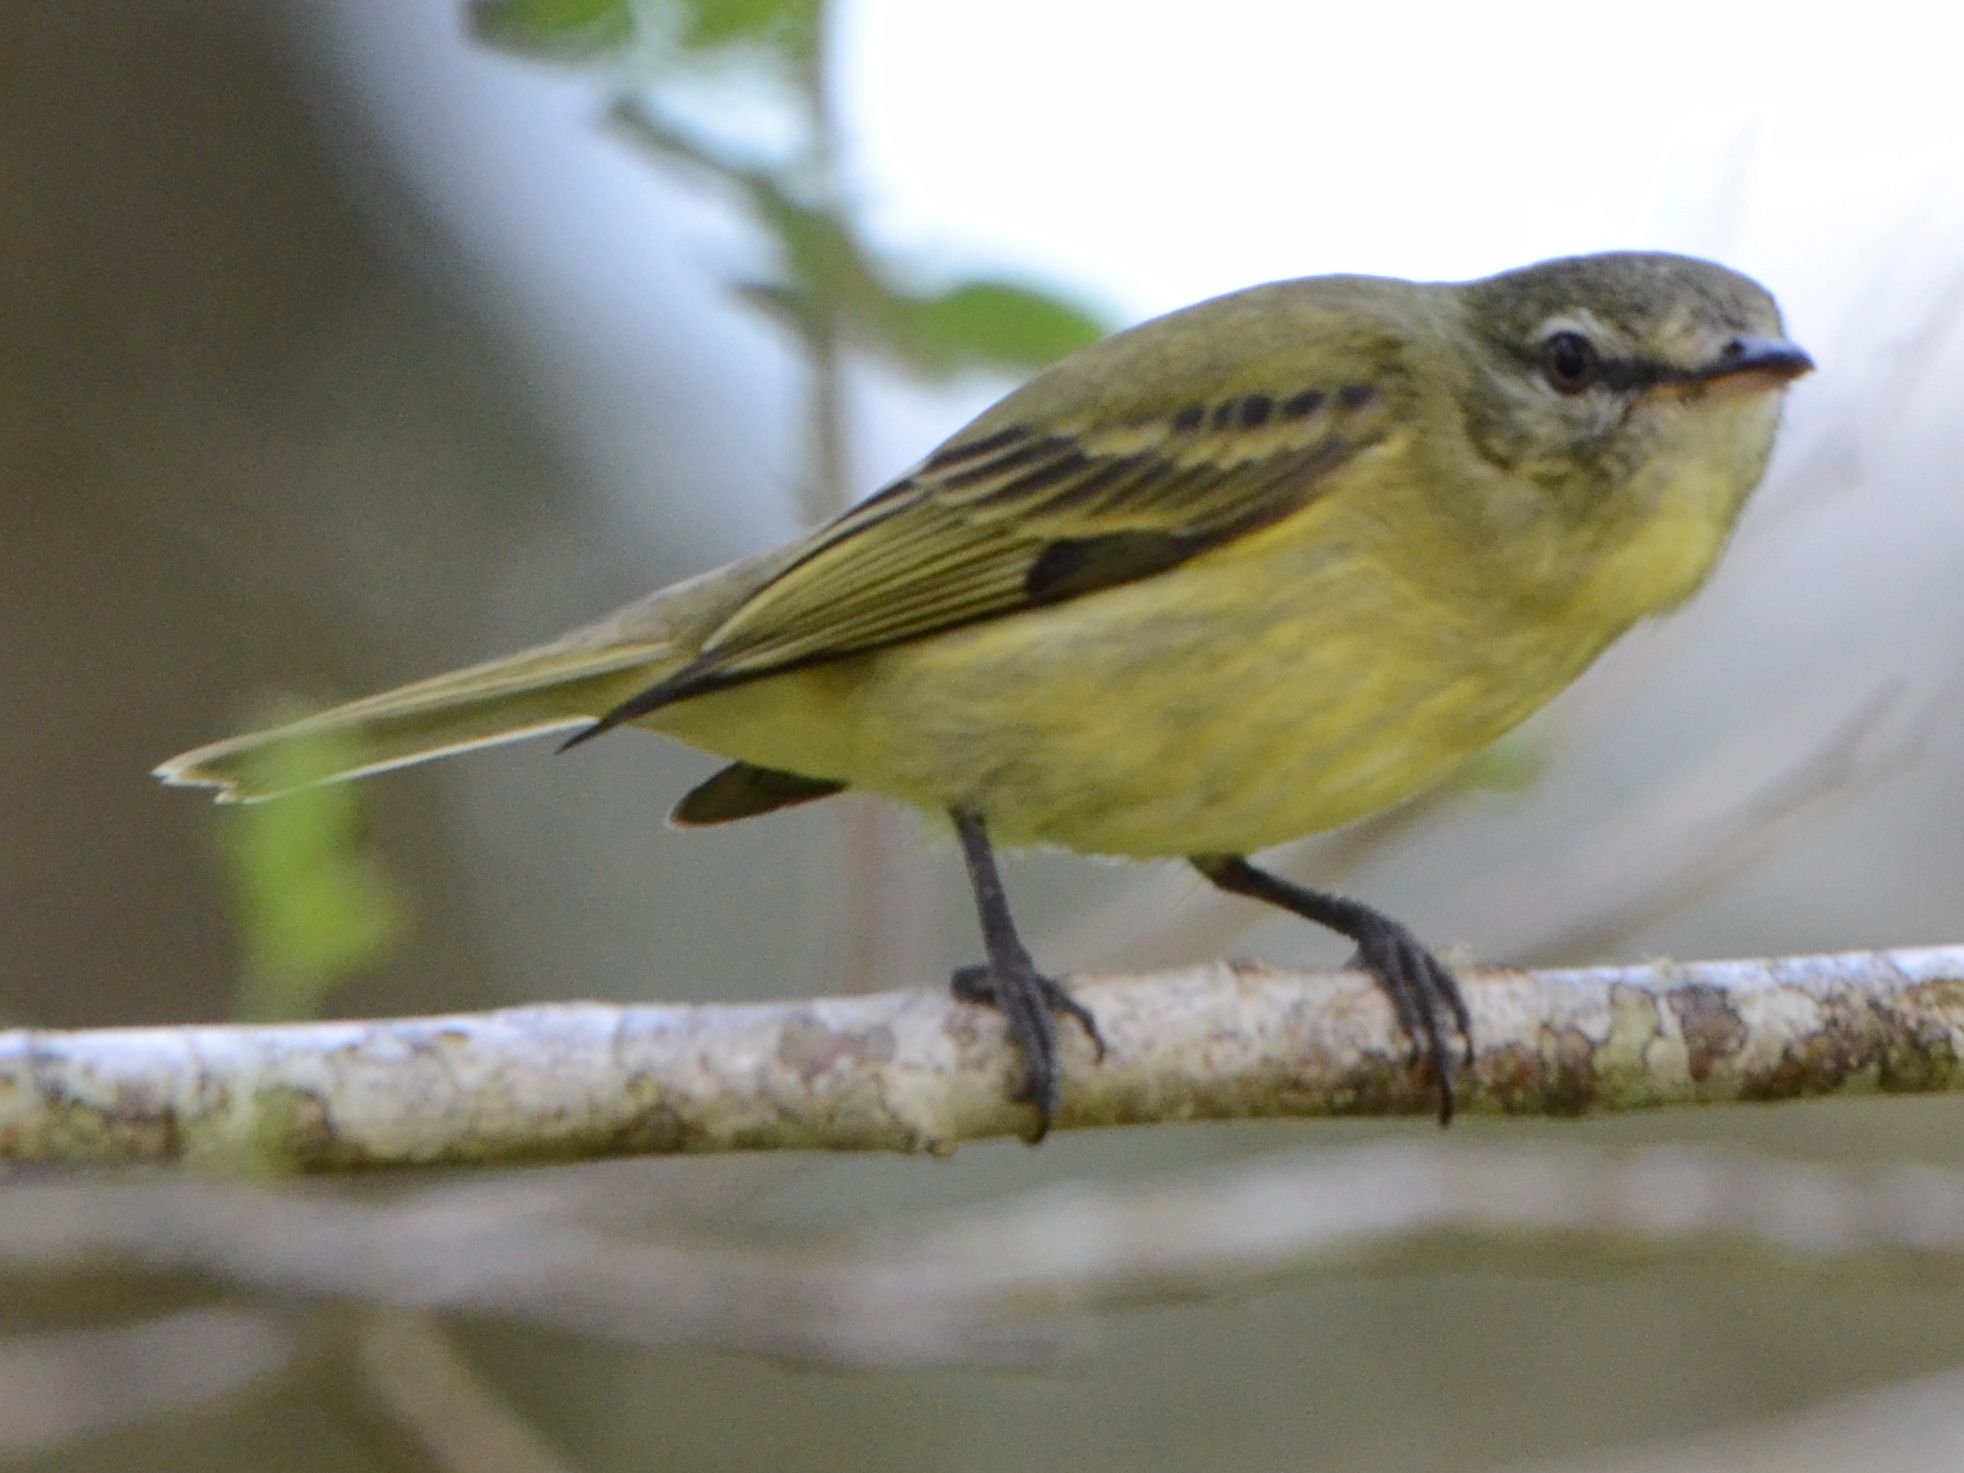 Click picture to see more Rough-legged Tyrannulets.